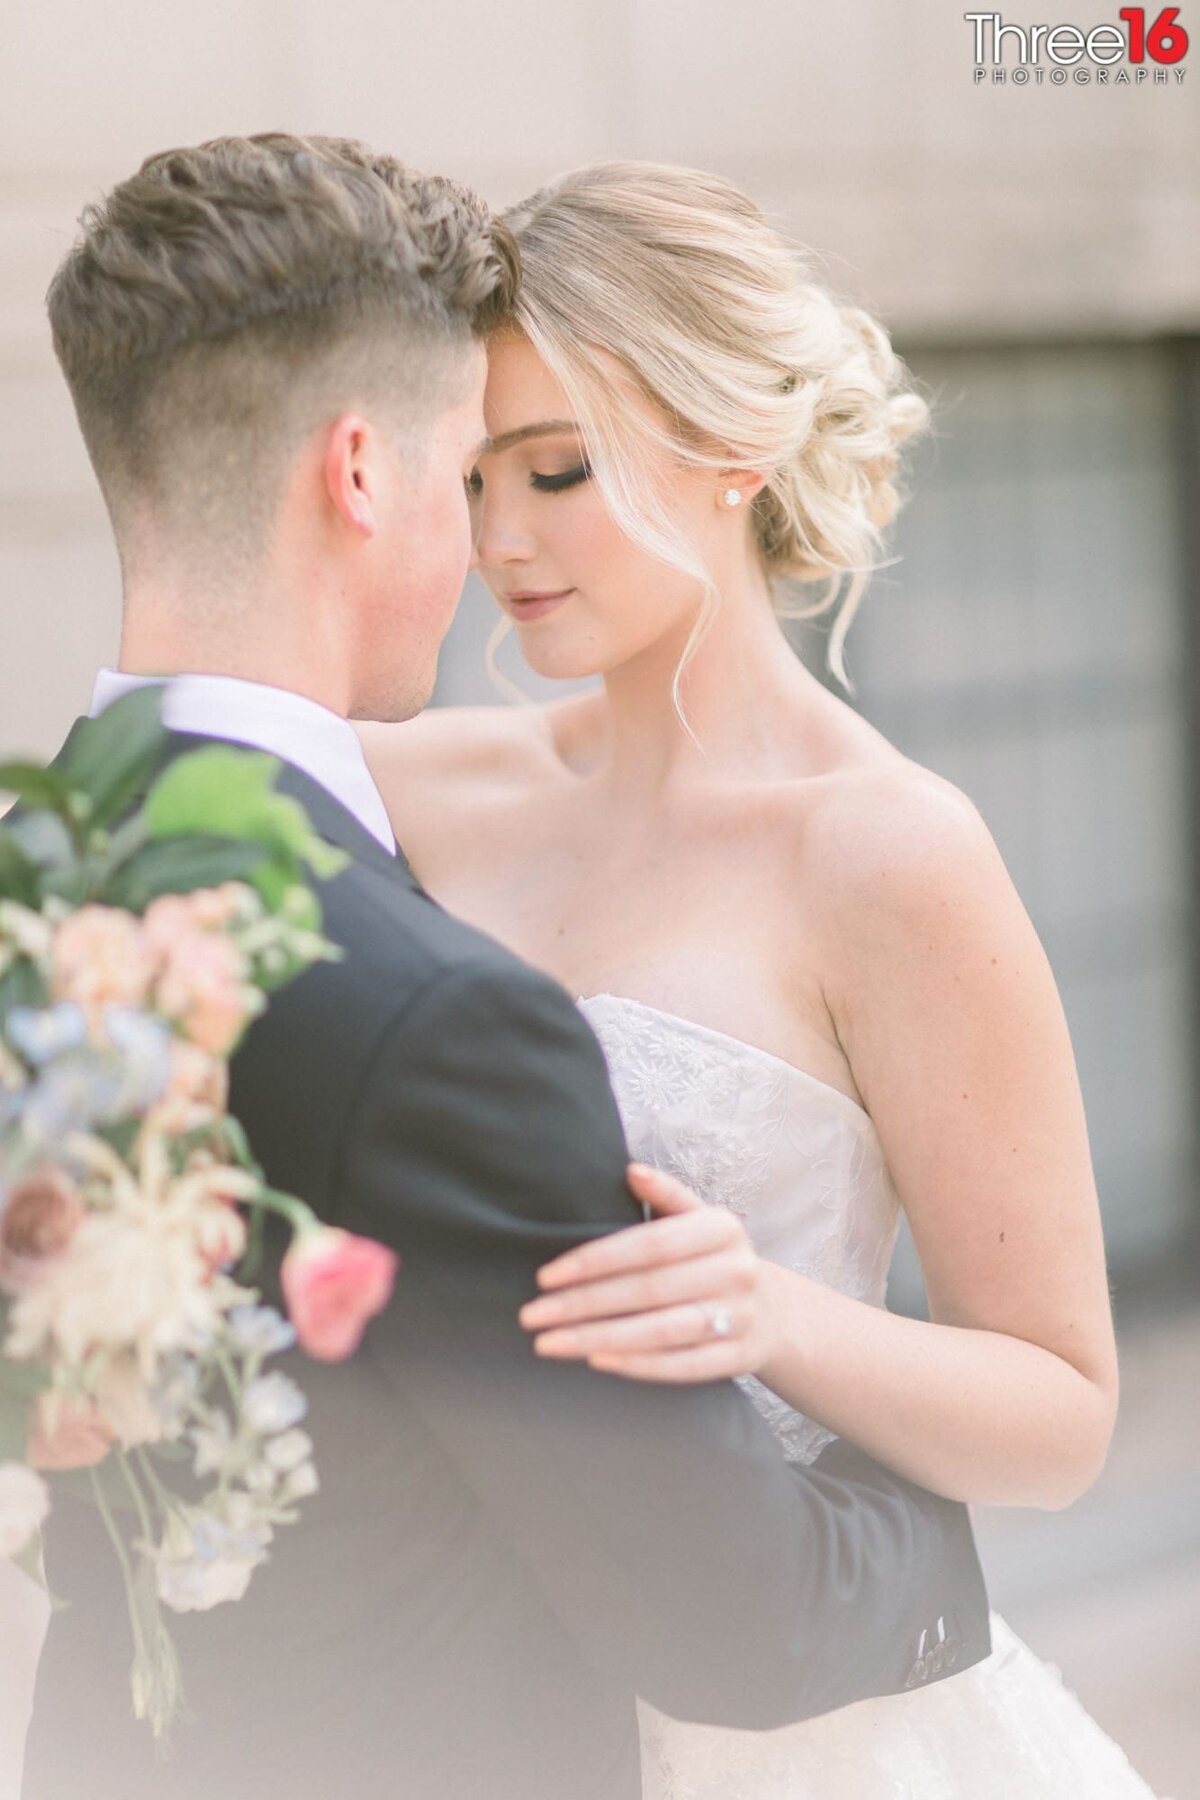 Sweet tender moment between newly married couple as their eyes are closed and foreheads are touching